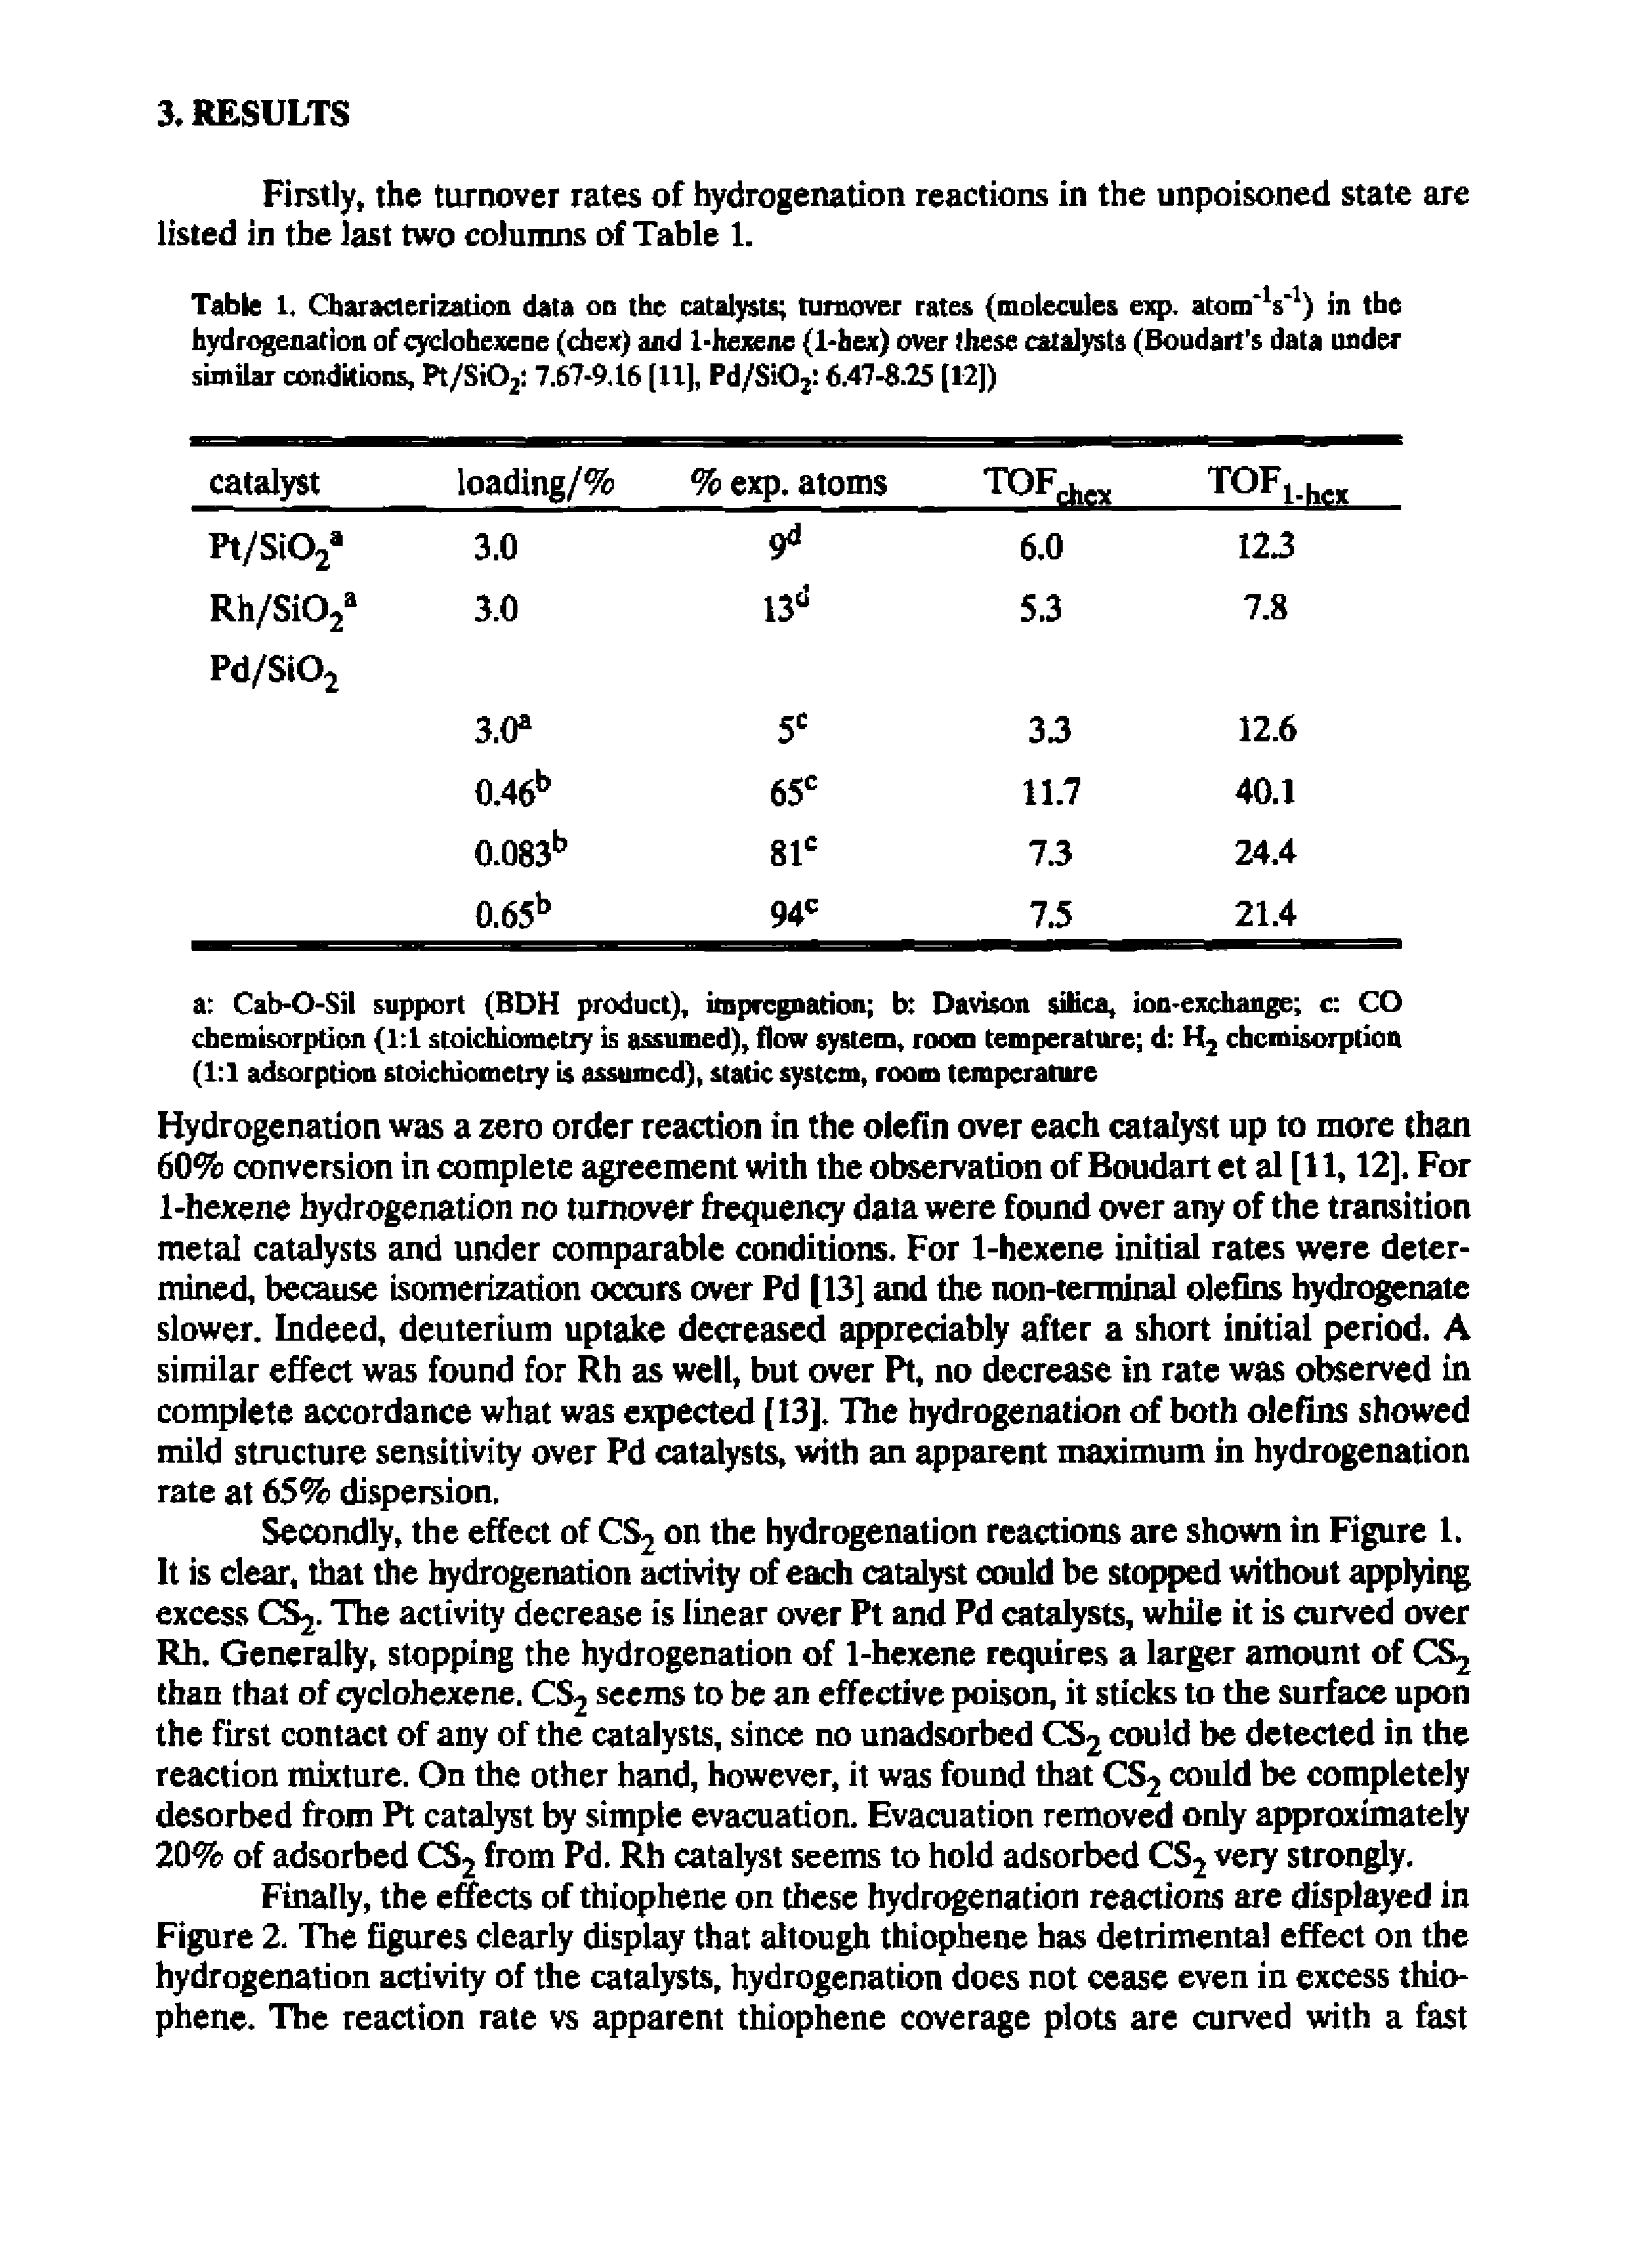 Table 1, Characterization data on the catalysts turnover rates (molecules exp. atom V1) in the hydrogenation of cyclohexene (chex) and 1-hexene (1-hex) over these catalysts (Boudart s data under similar conditions, Pt/Si02 7.67-9.16 [11], Pd/Si02 6.47-8.25 [12])...